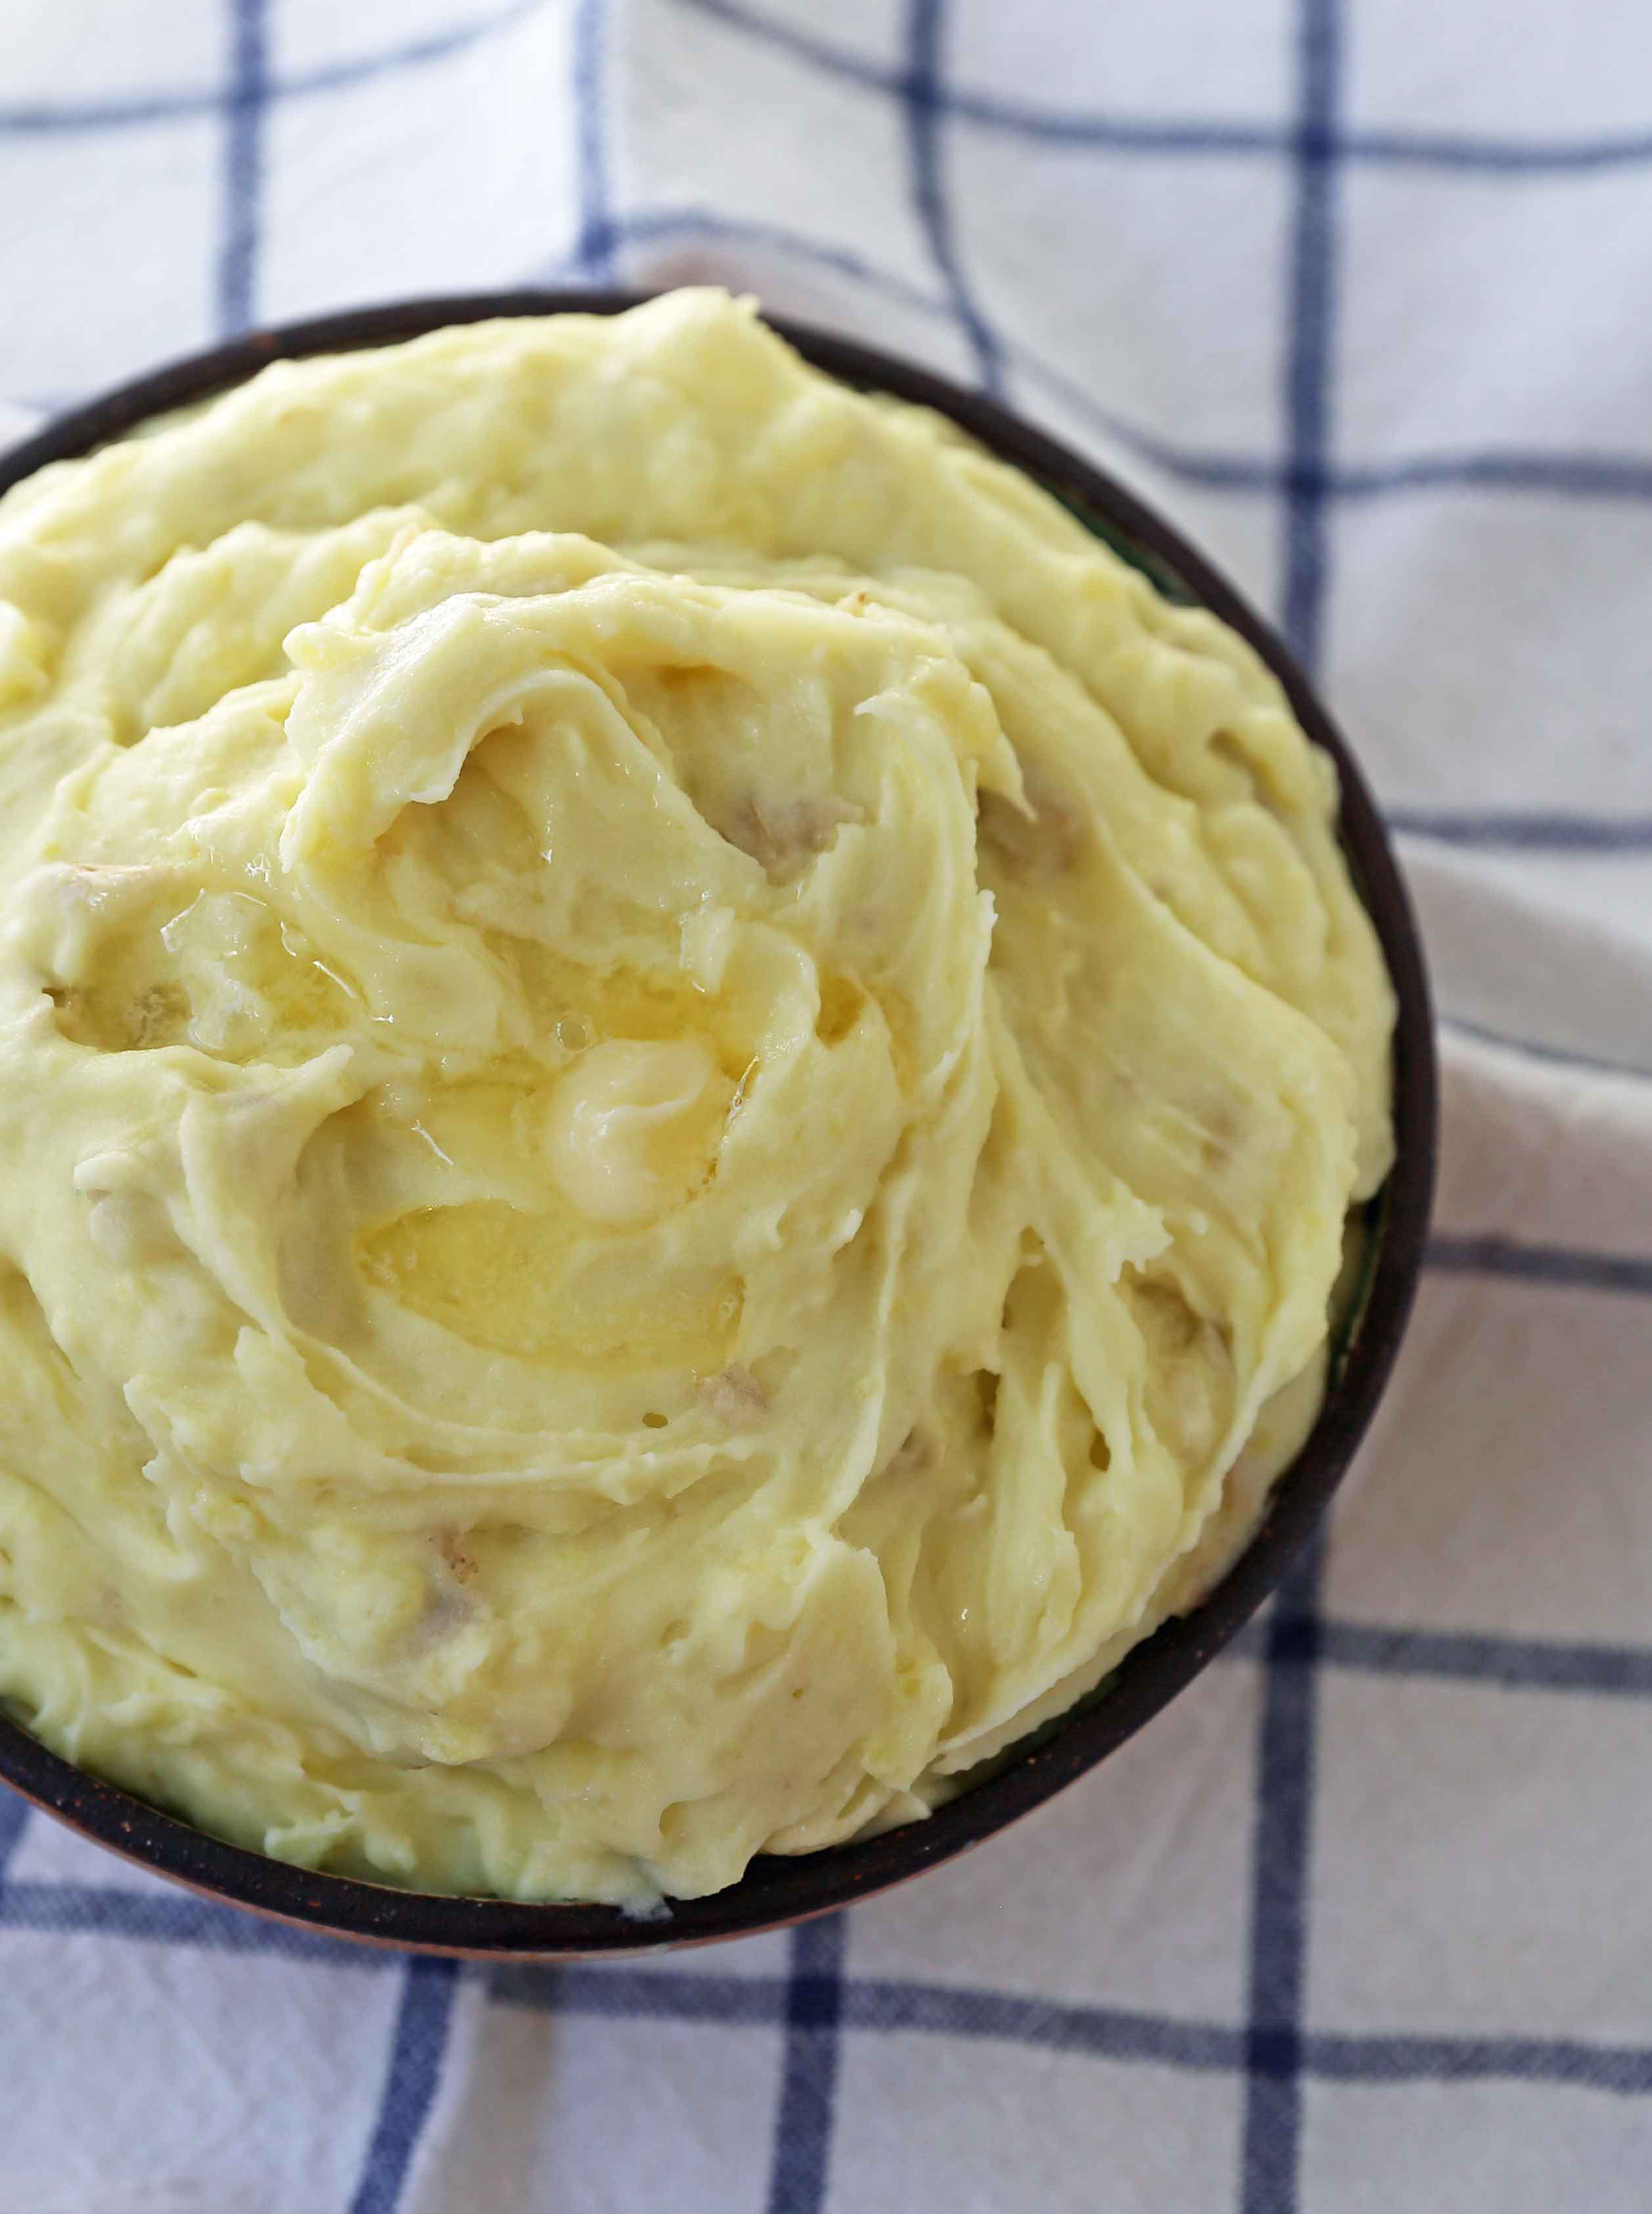 Perfect Creamy Mashed Potatoes. Simple, foolproof, creamy classic mashed potatoes recipe. This is a classic side dish that everyone will love! How to make the BEST Mashed Potatoes. www.modernhoney.com #mashedpotatoes #potatoes #thanksgiving #thanksgivingsidedish